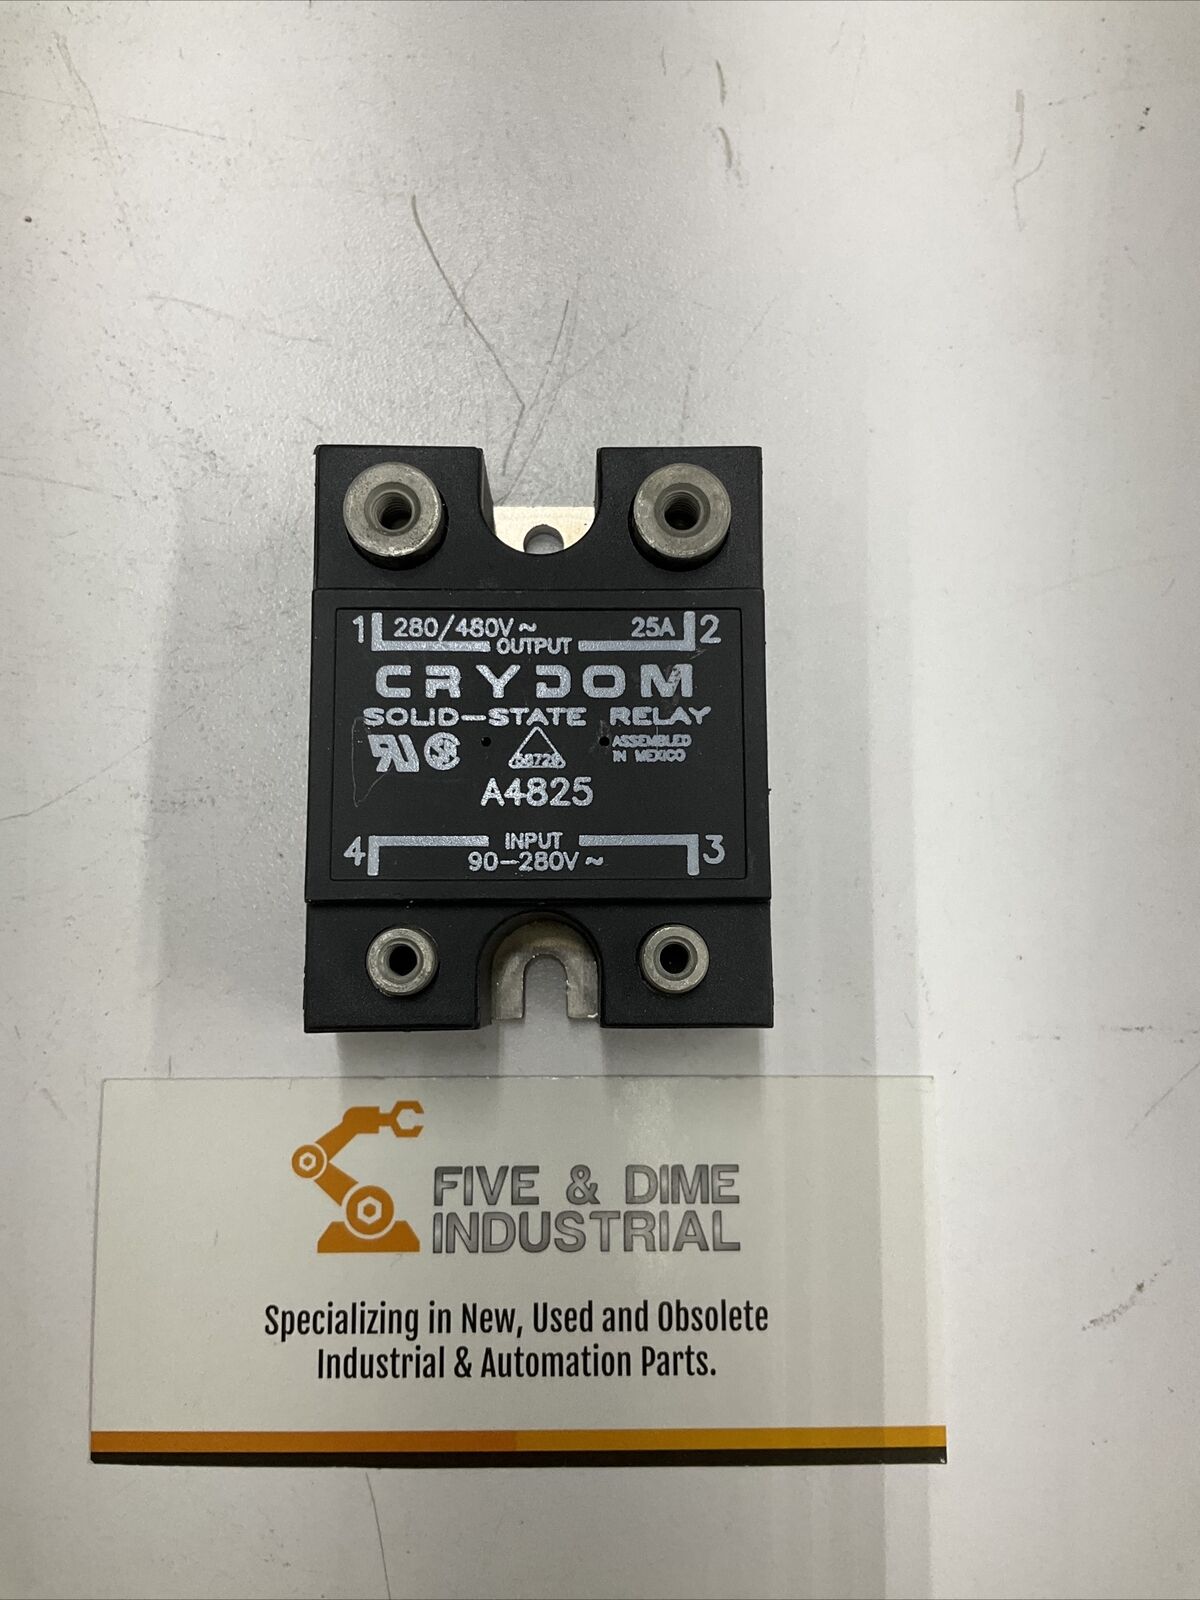 Crydom A4825 New Solid State Relay Input 90-280AC, Output 280/480VAC 25A (CL327) - 0